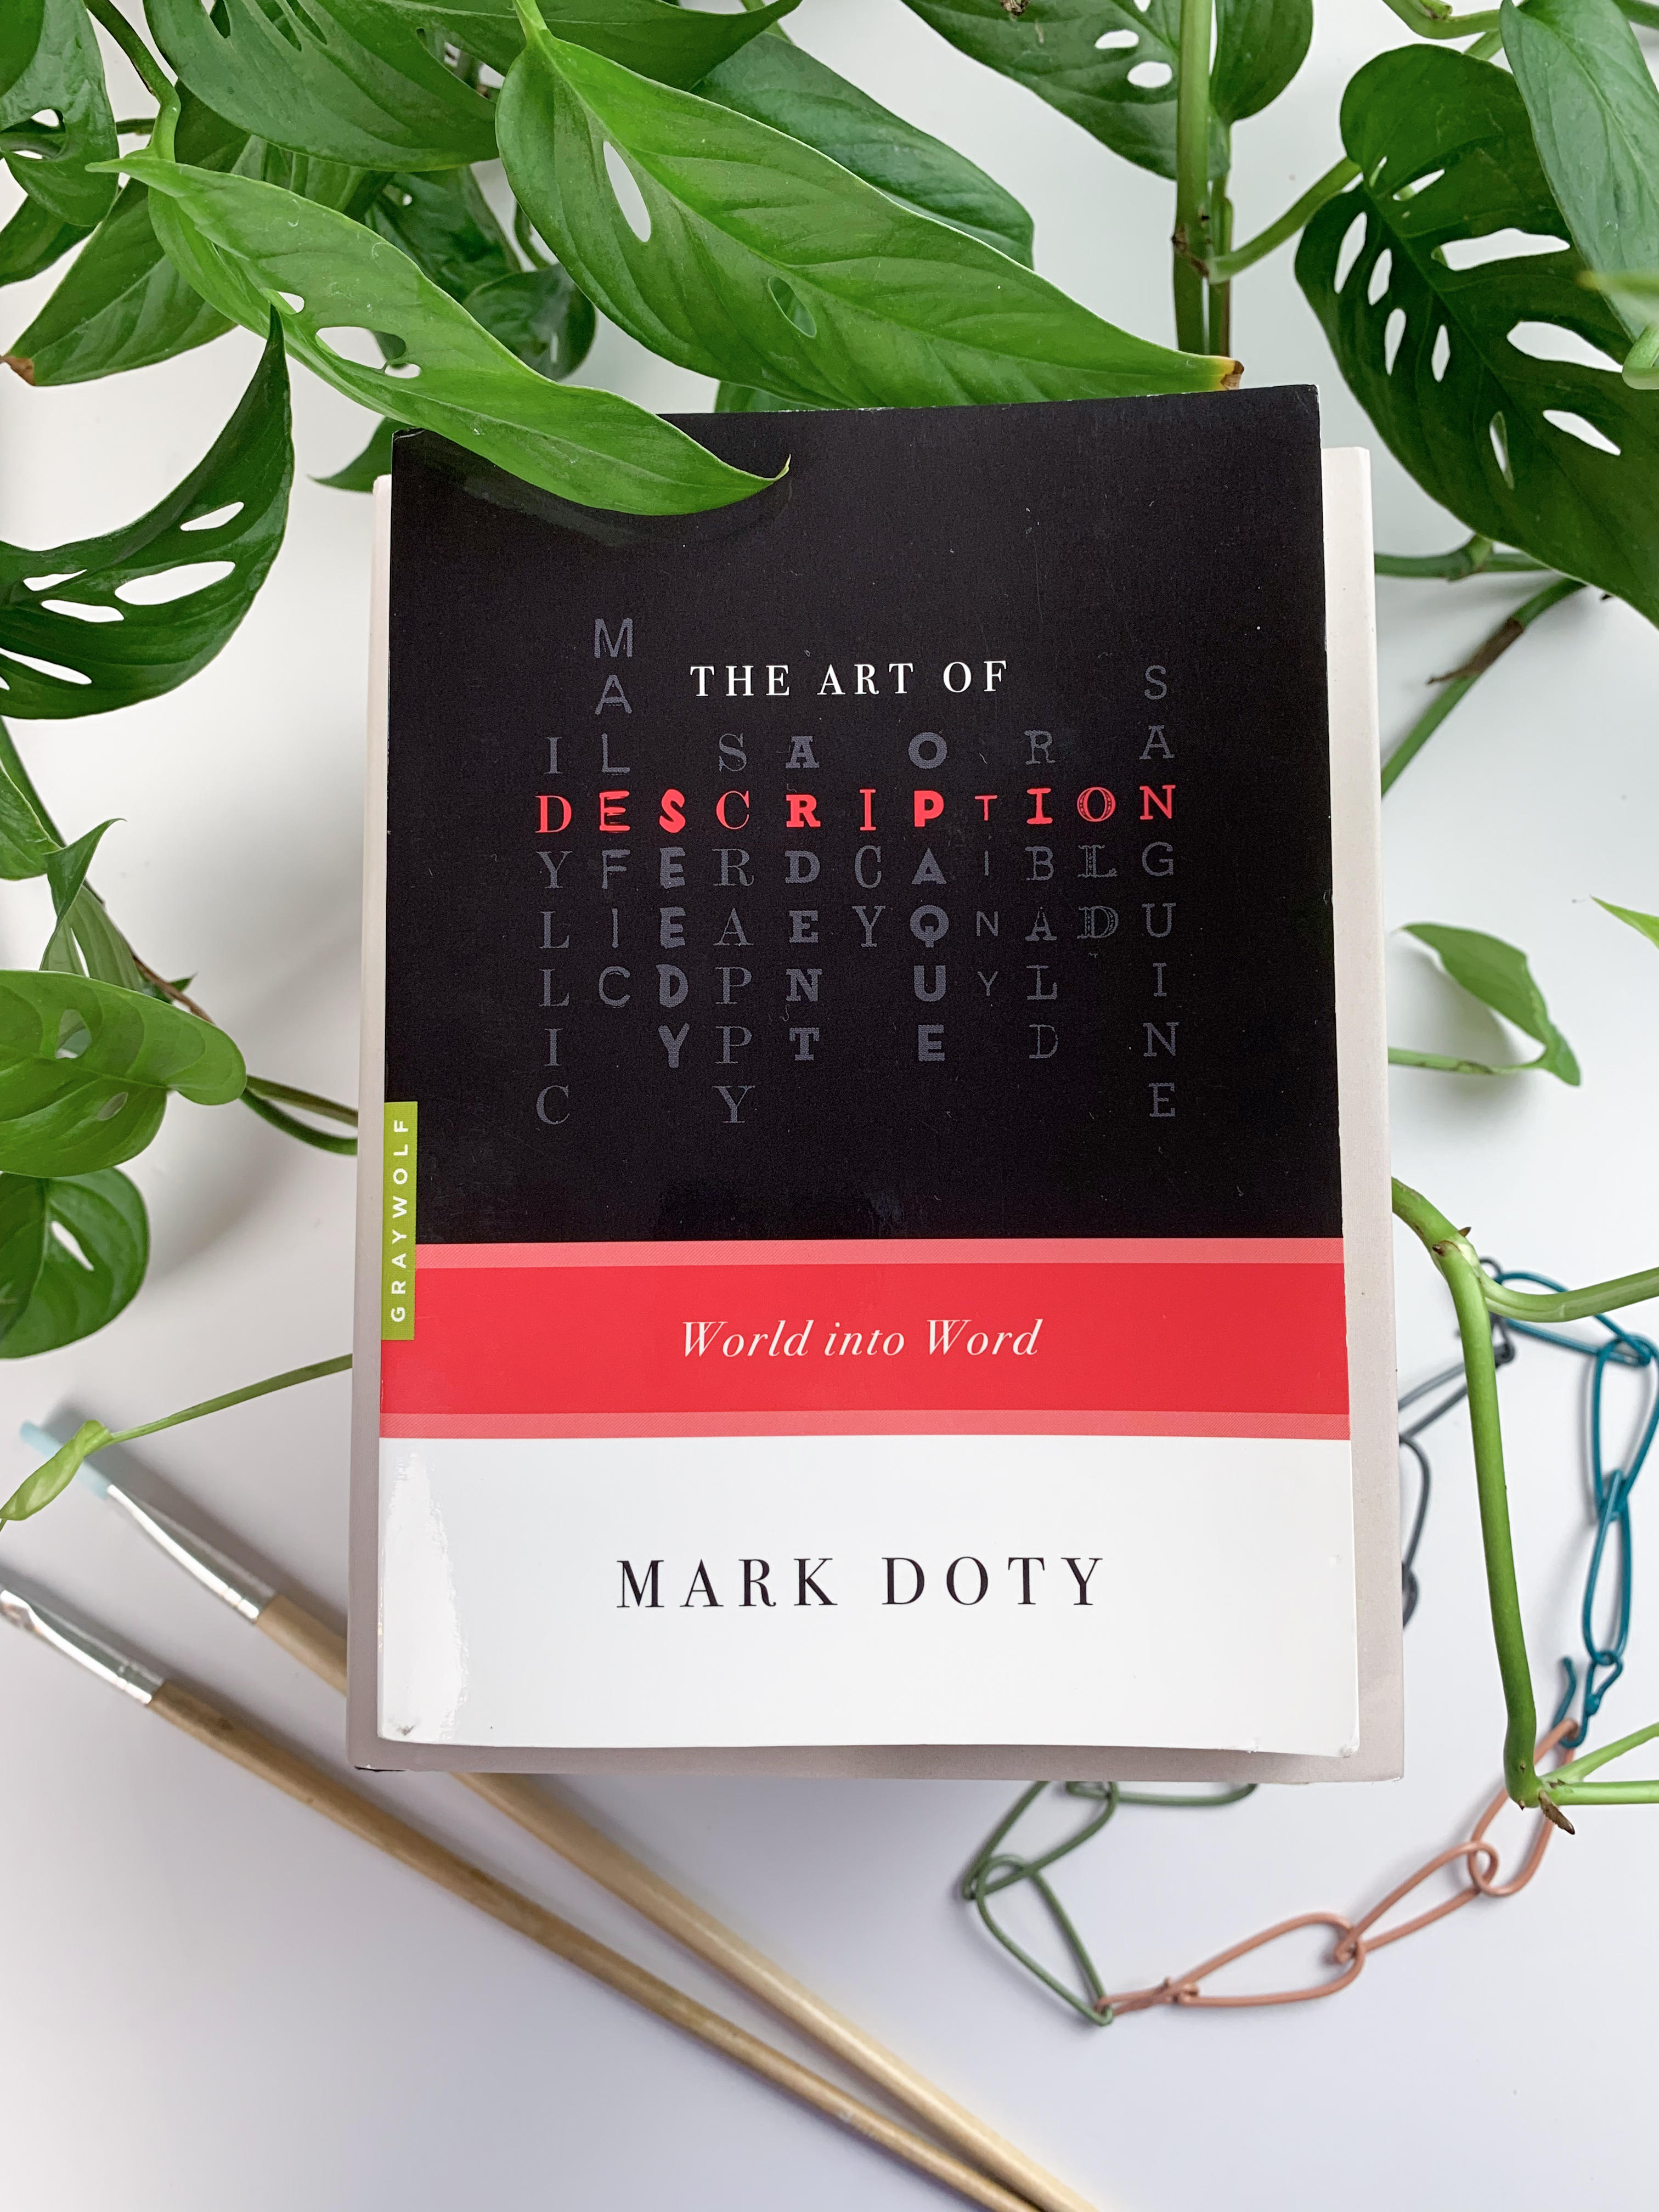 review of The Art of Description by Mark Doty